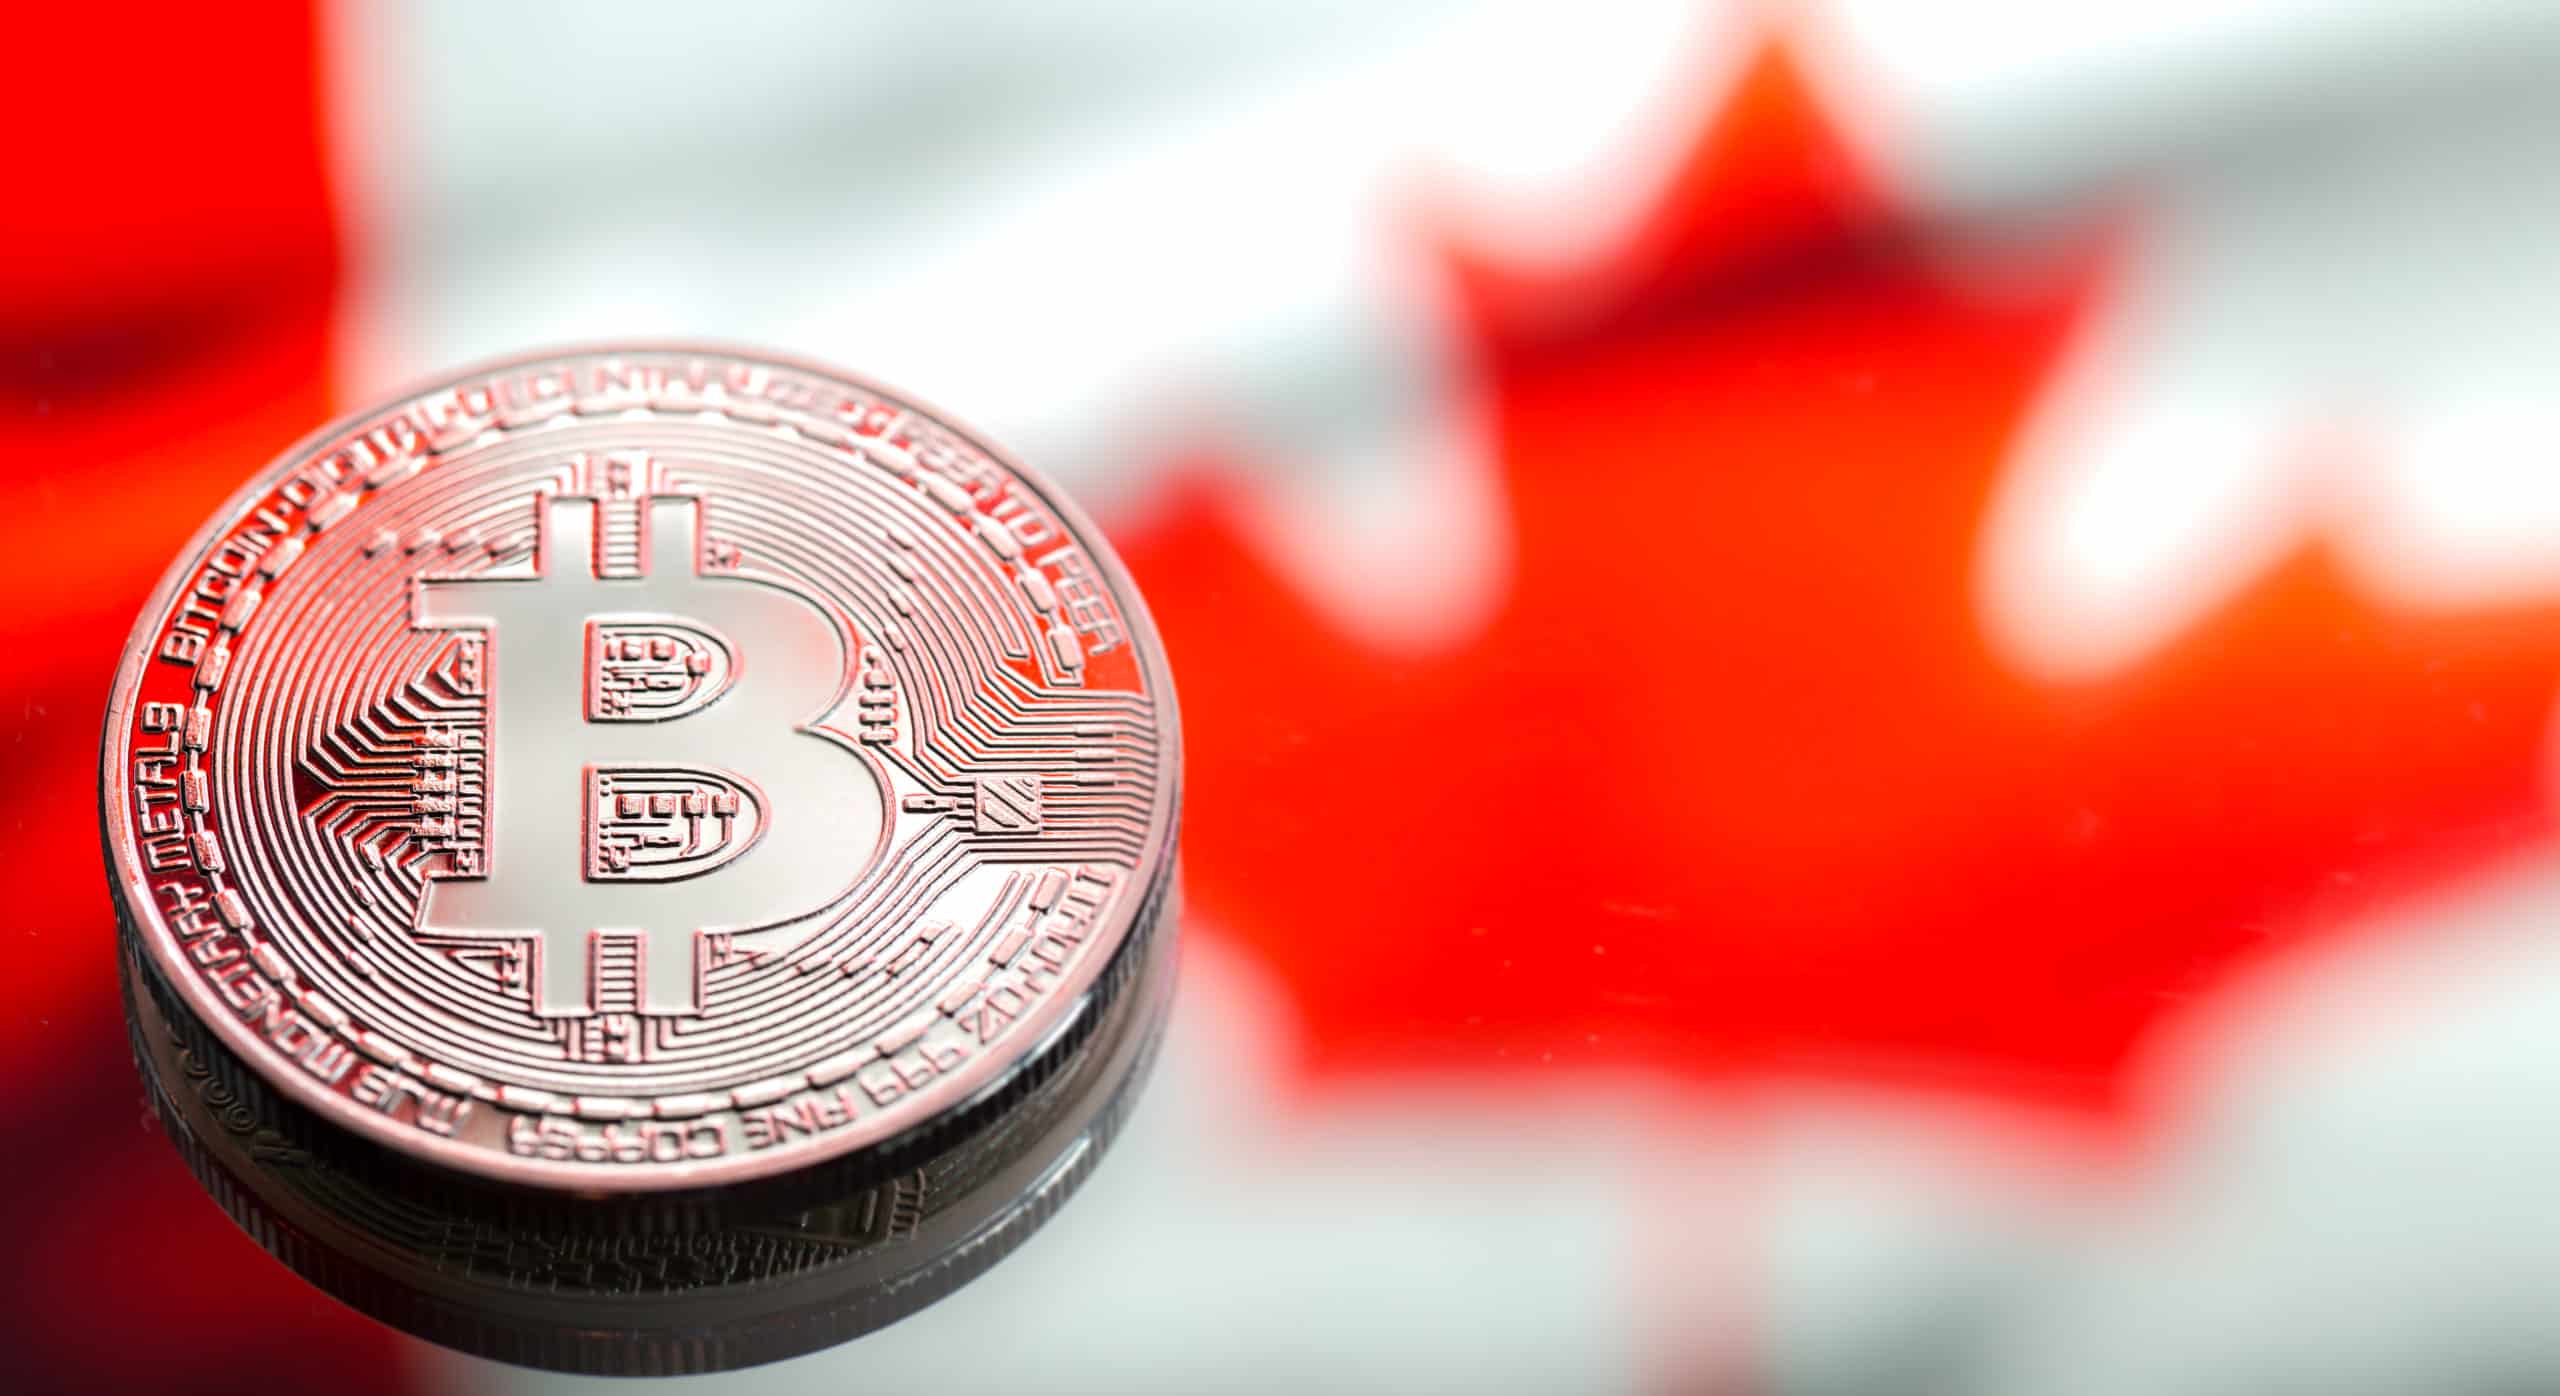 coins Bitcoin, against the background of Canada flag, concept of